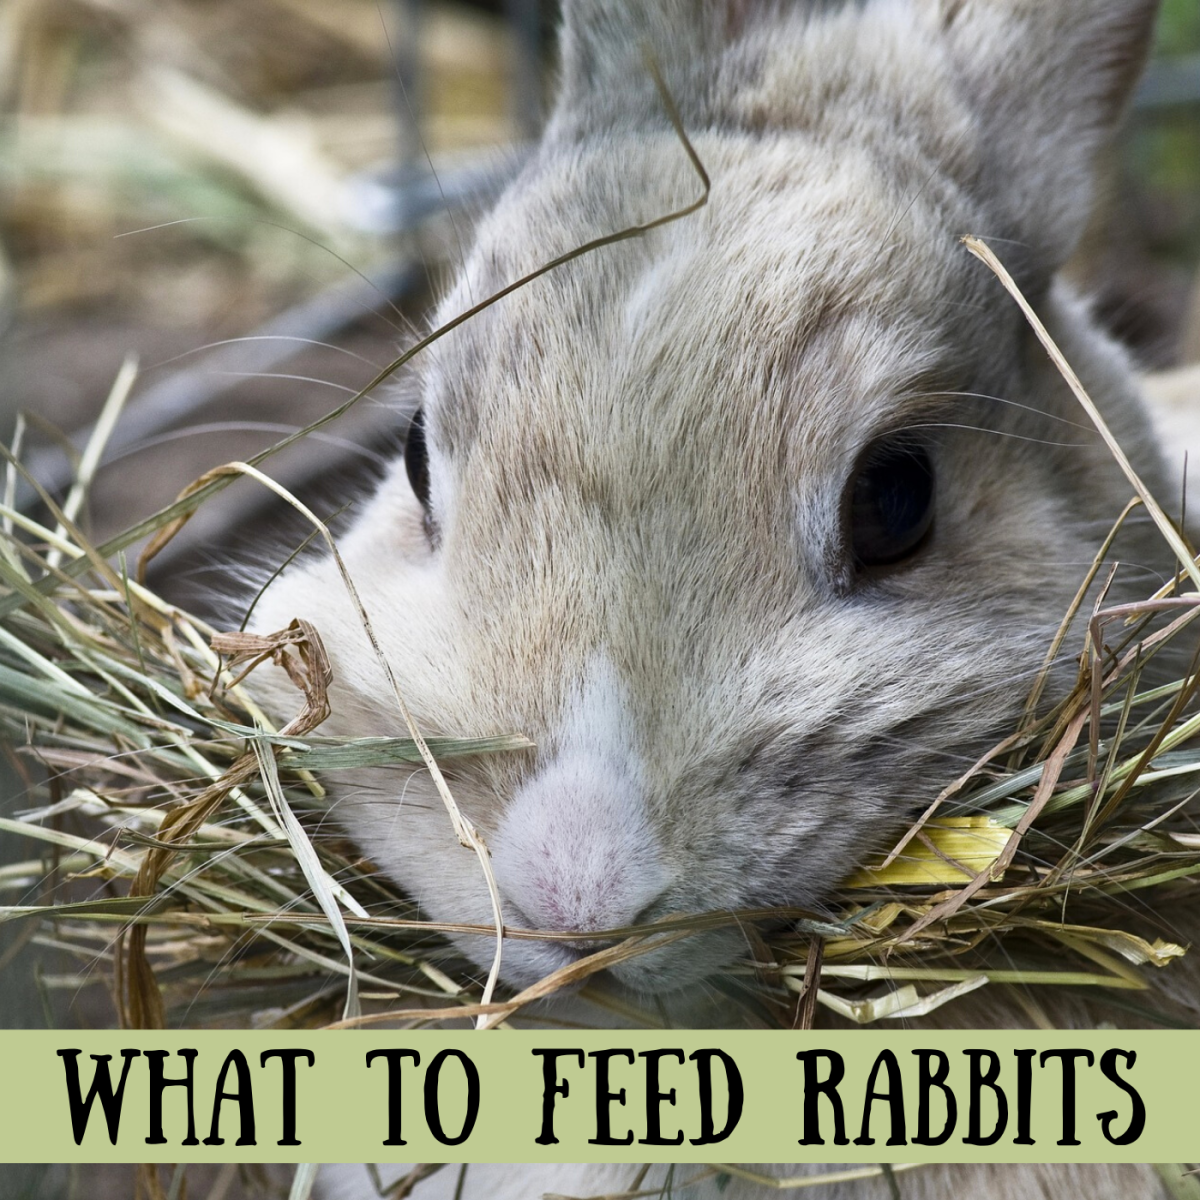 What Does A Baby Rabbit Eat?